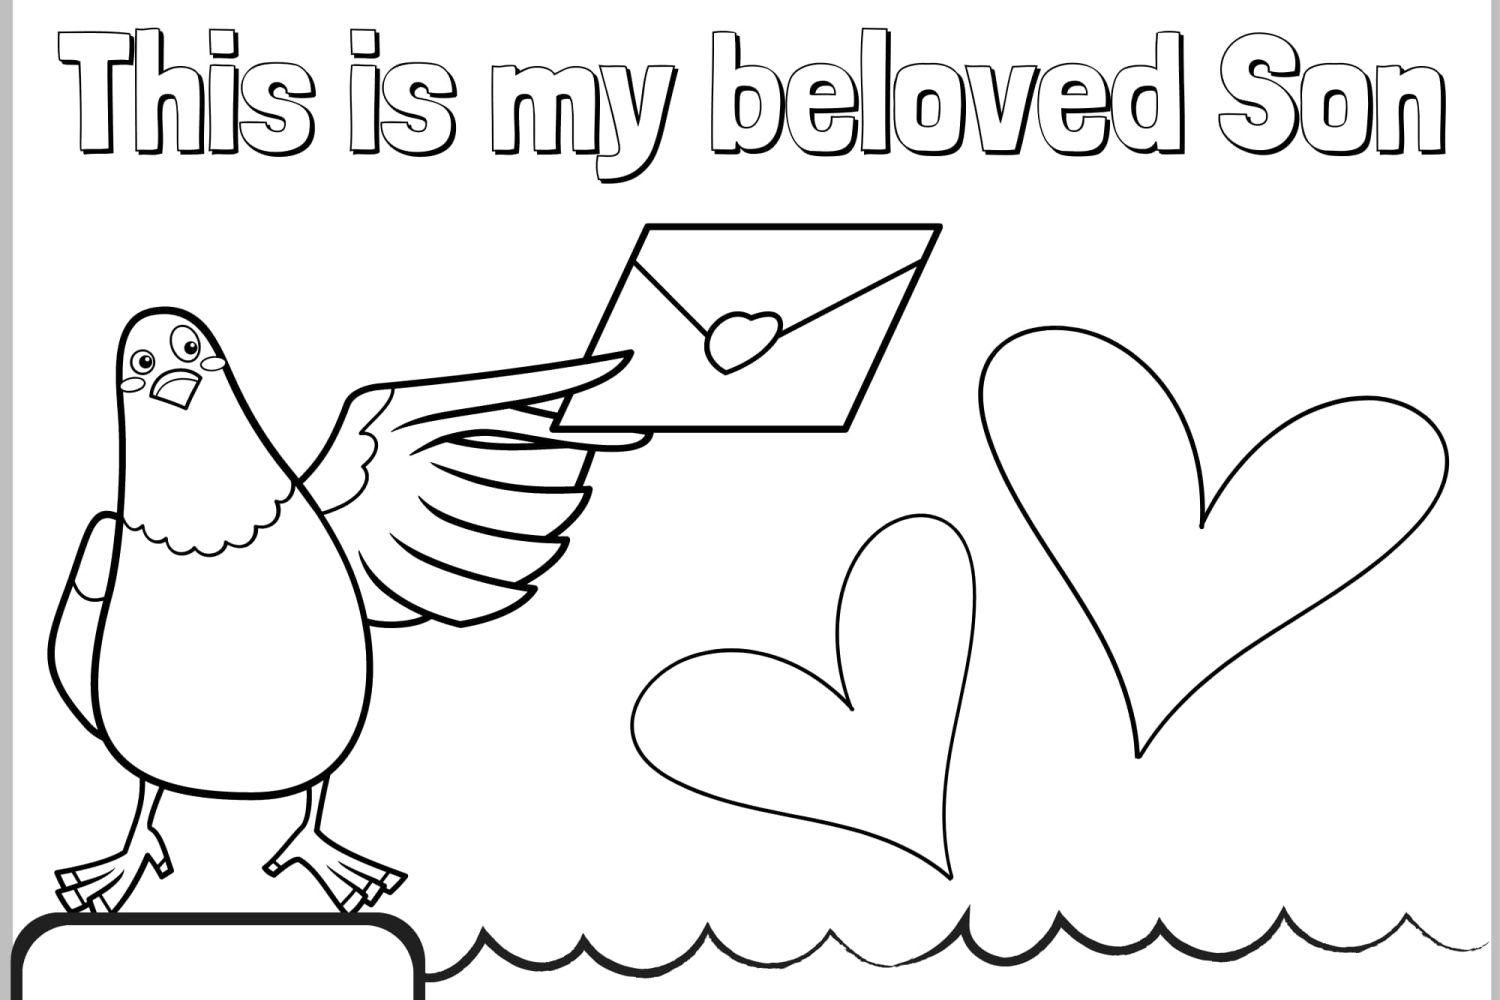 Colouring%20page%20-%20My%20beloved%20son-ce43538c Animals